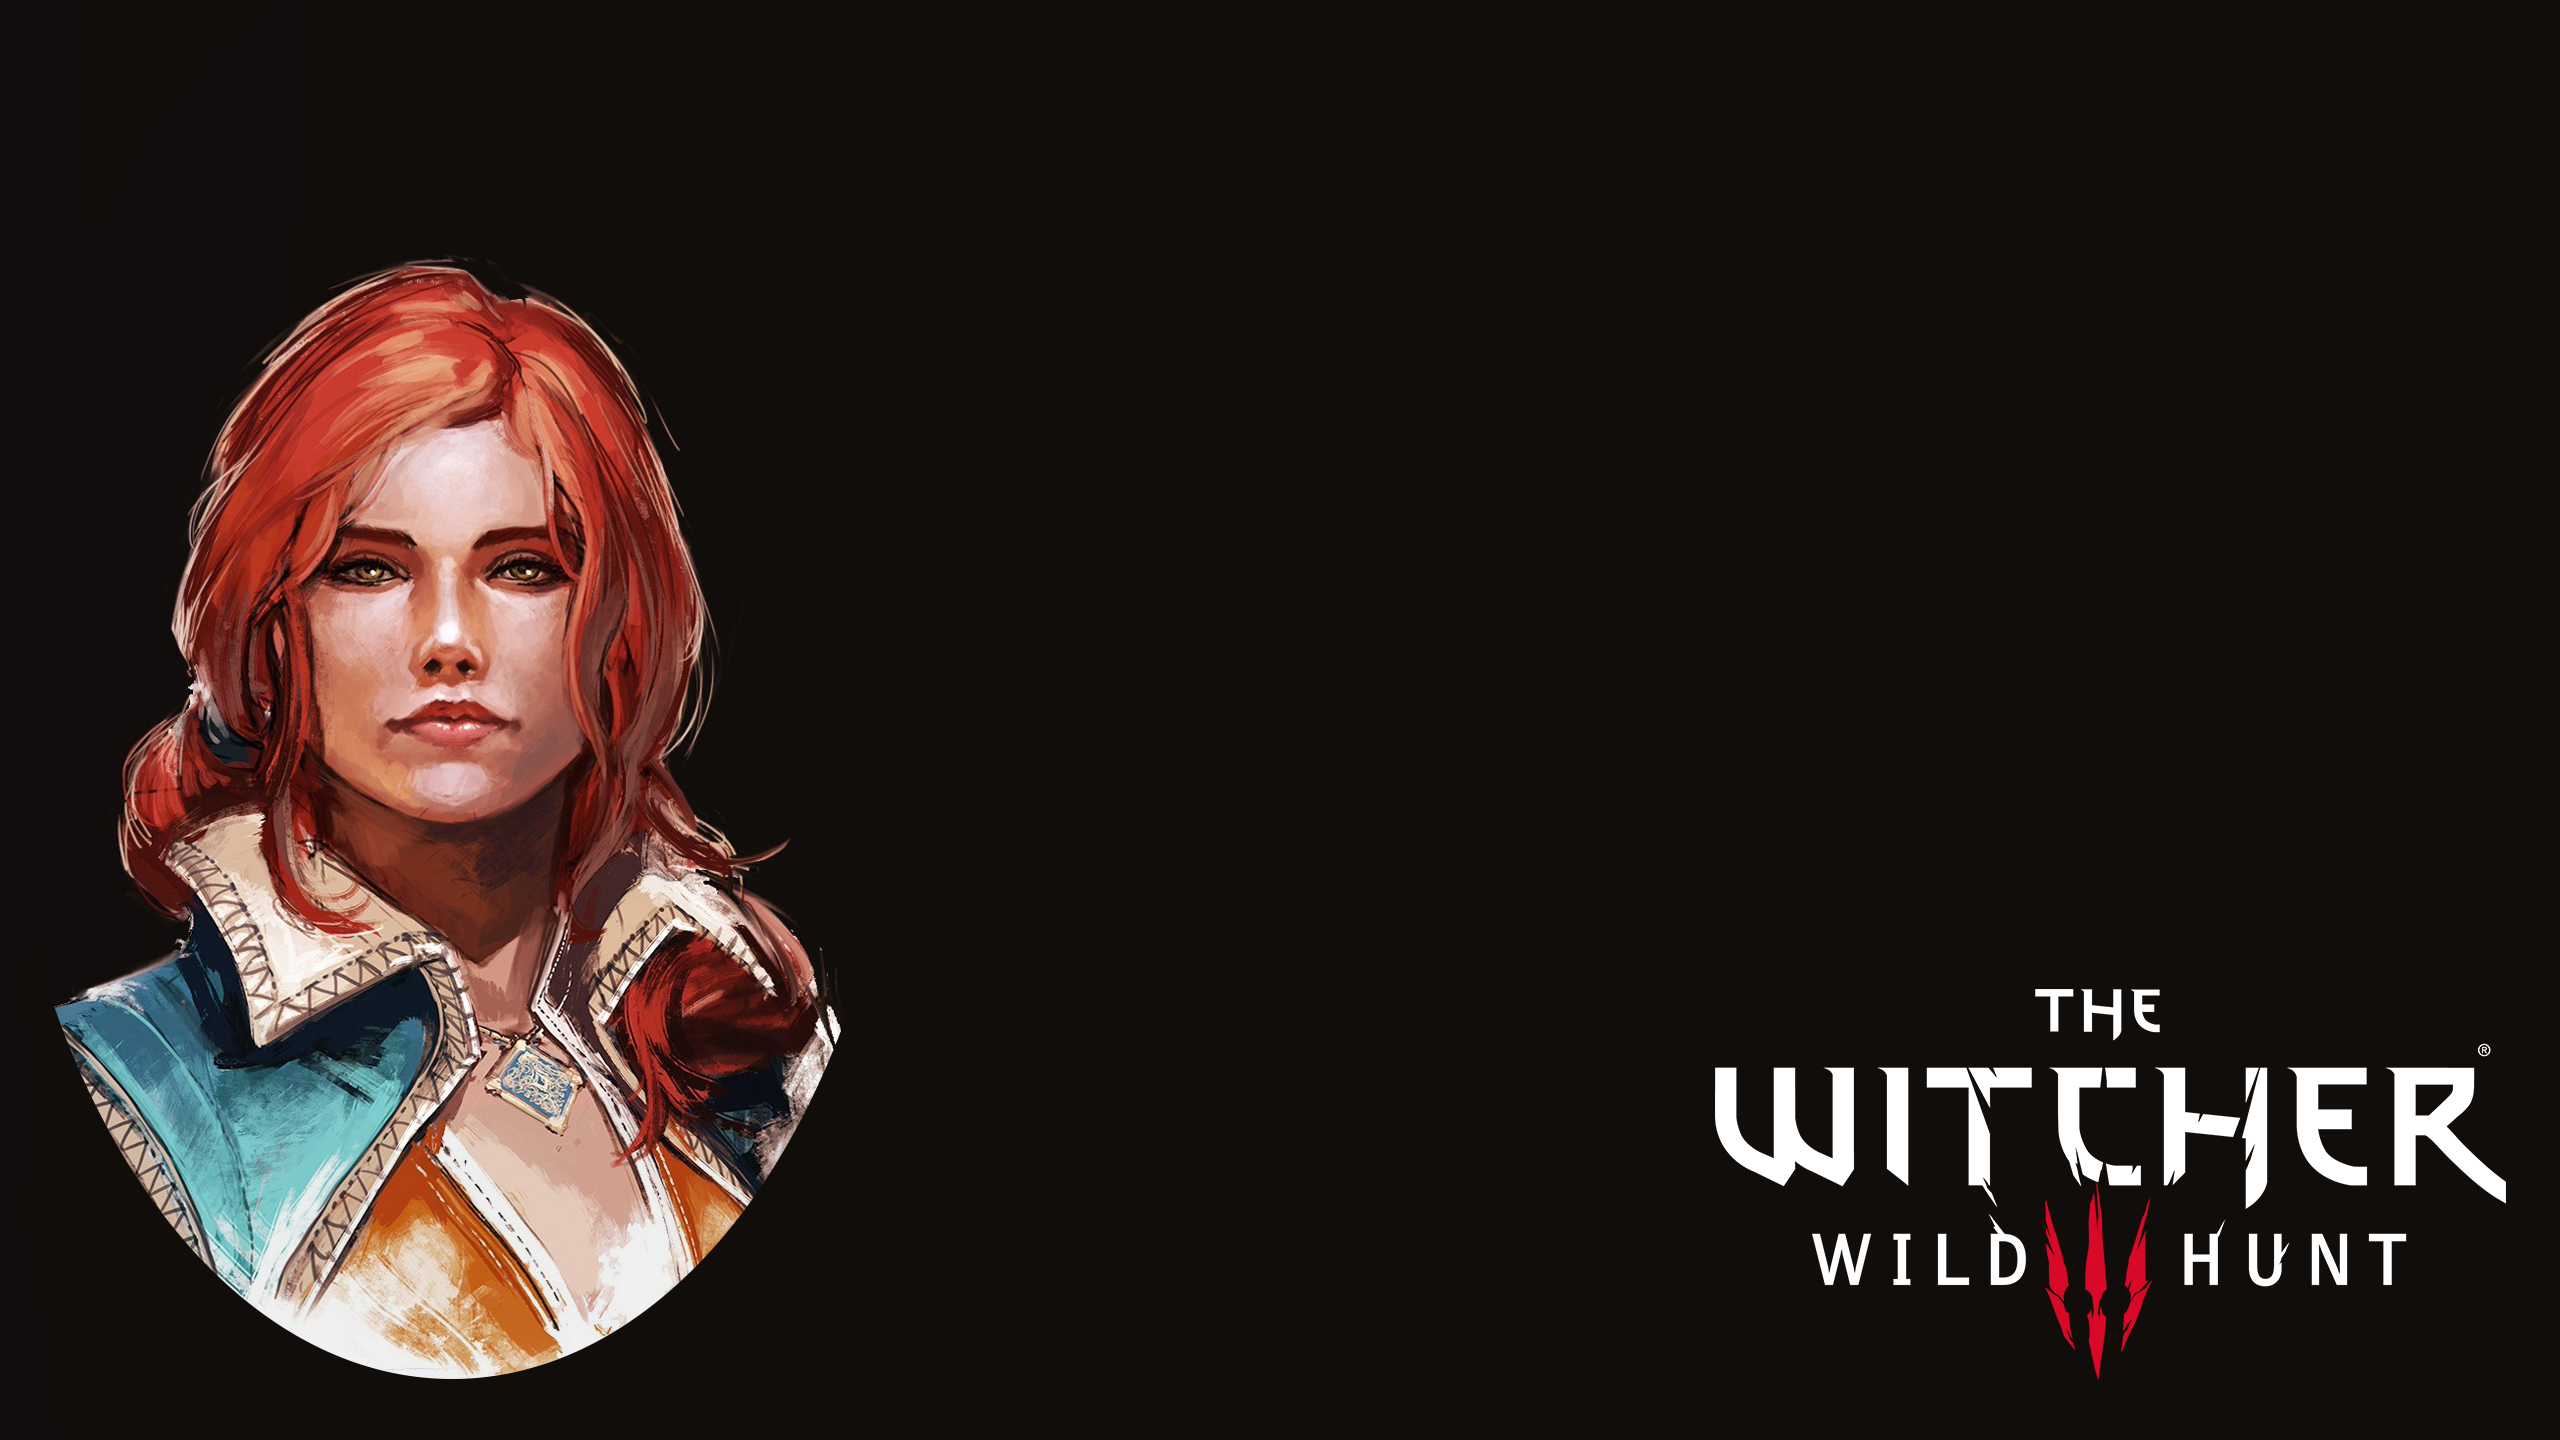 People 2560x1440 The Witcher 3: Wild Hunt Triss Merigold artwork video games RPG redhead video game art video game girls fantasy art fantasy girl simple background black background PC gaming CD Projekt RED women